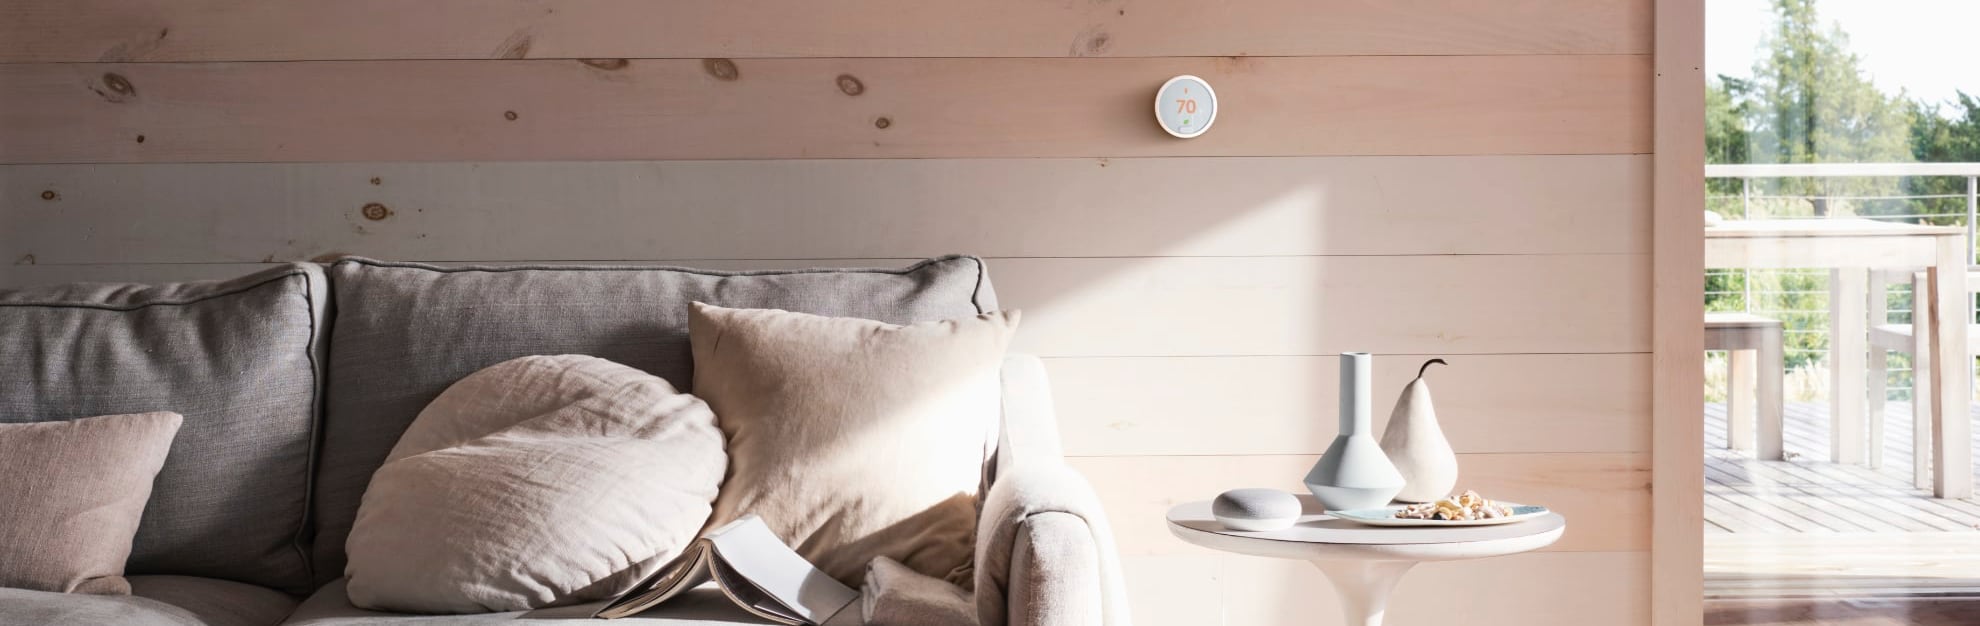 Vivint Home Automation in Erie